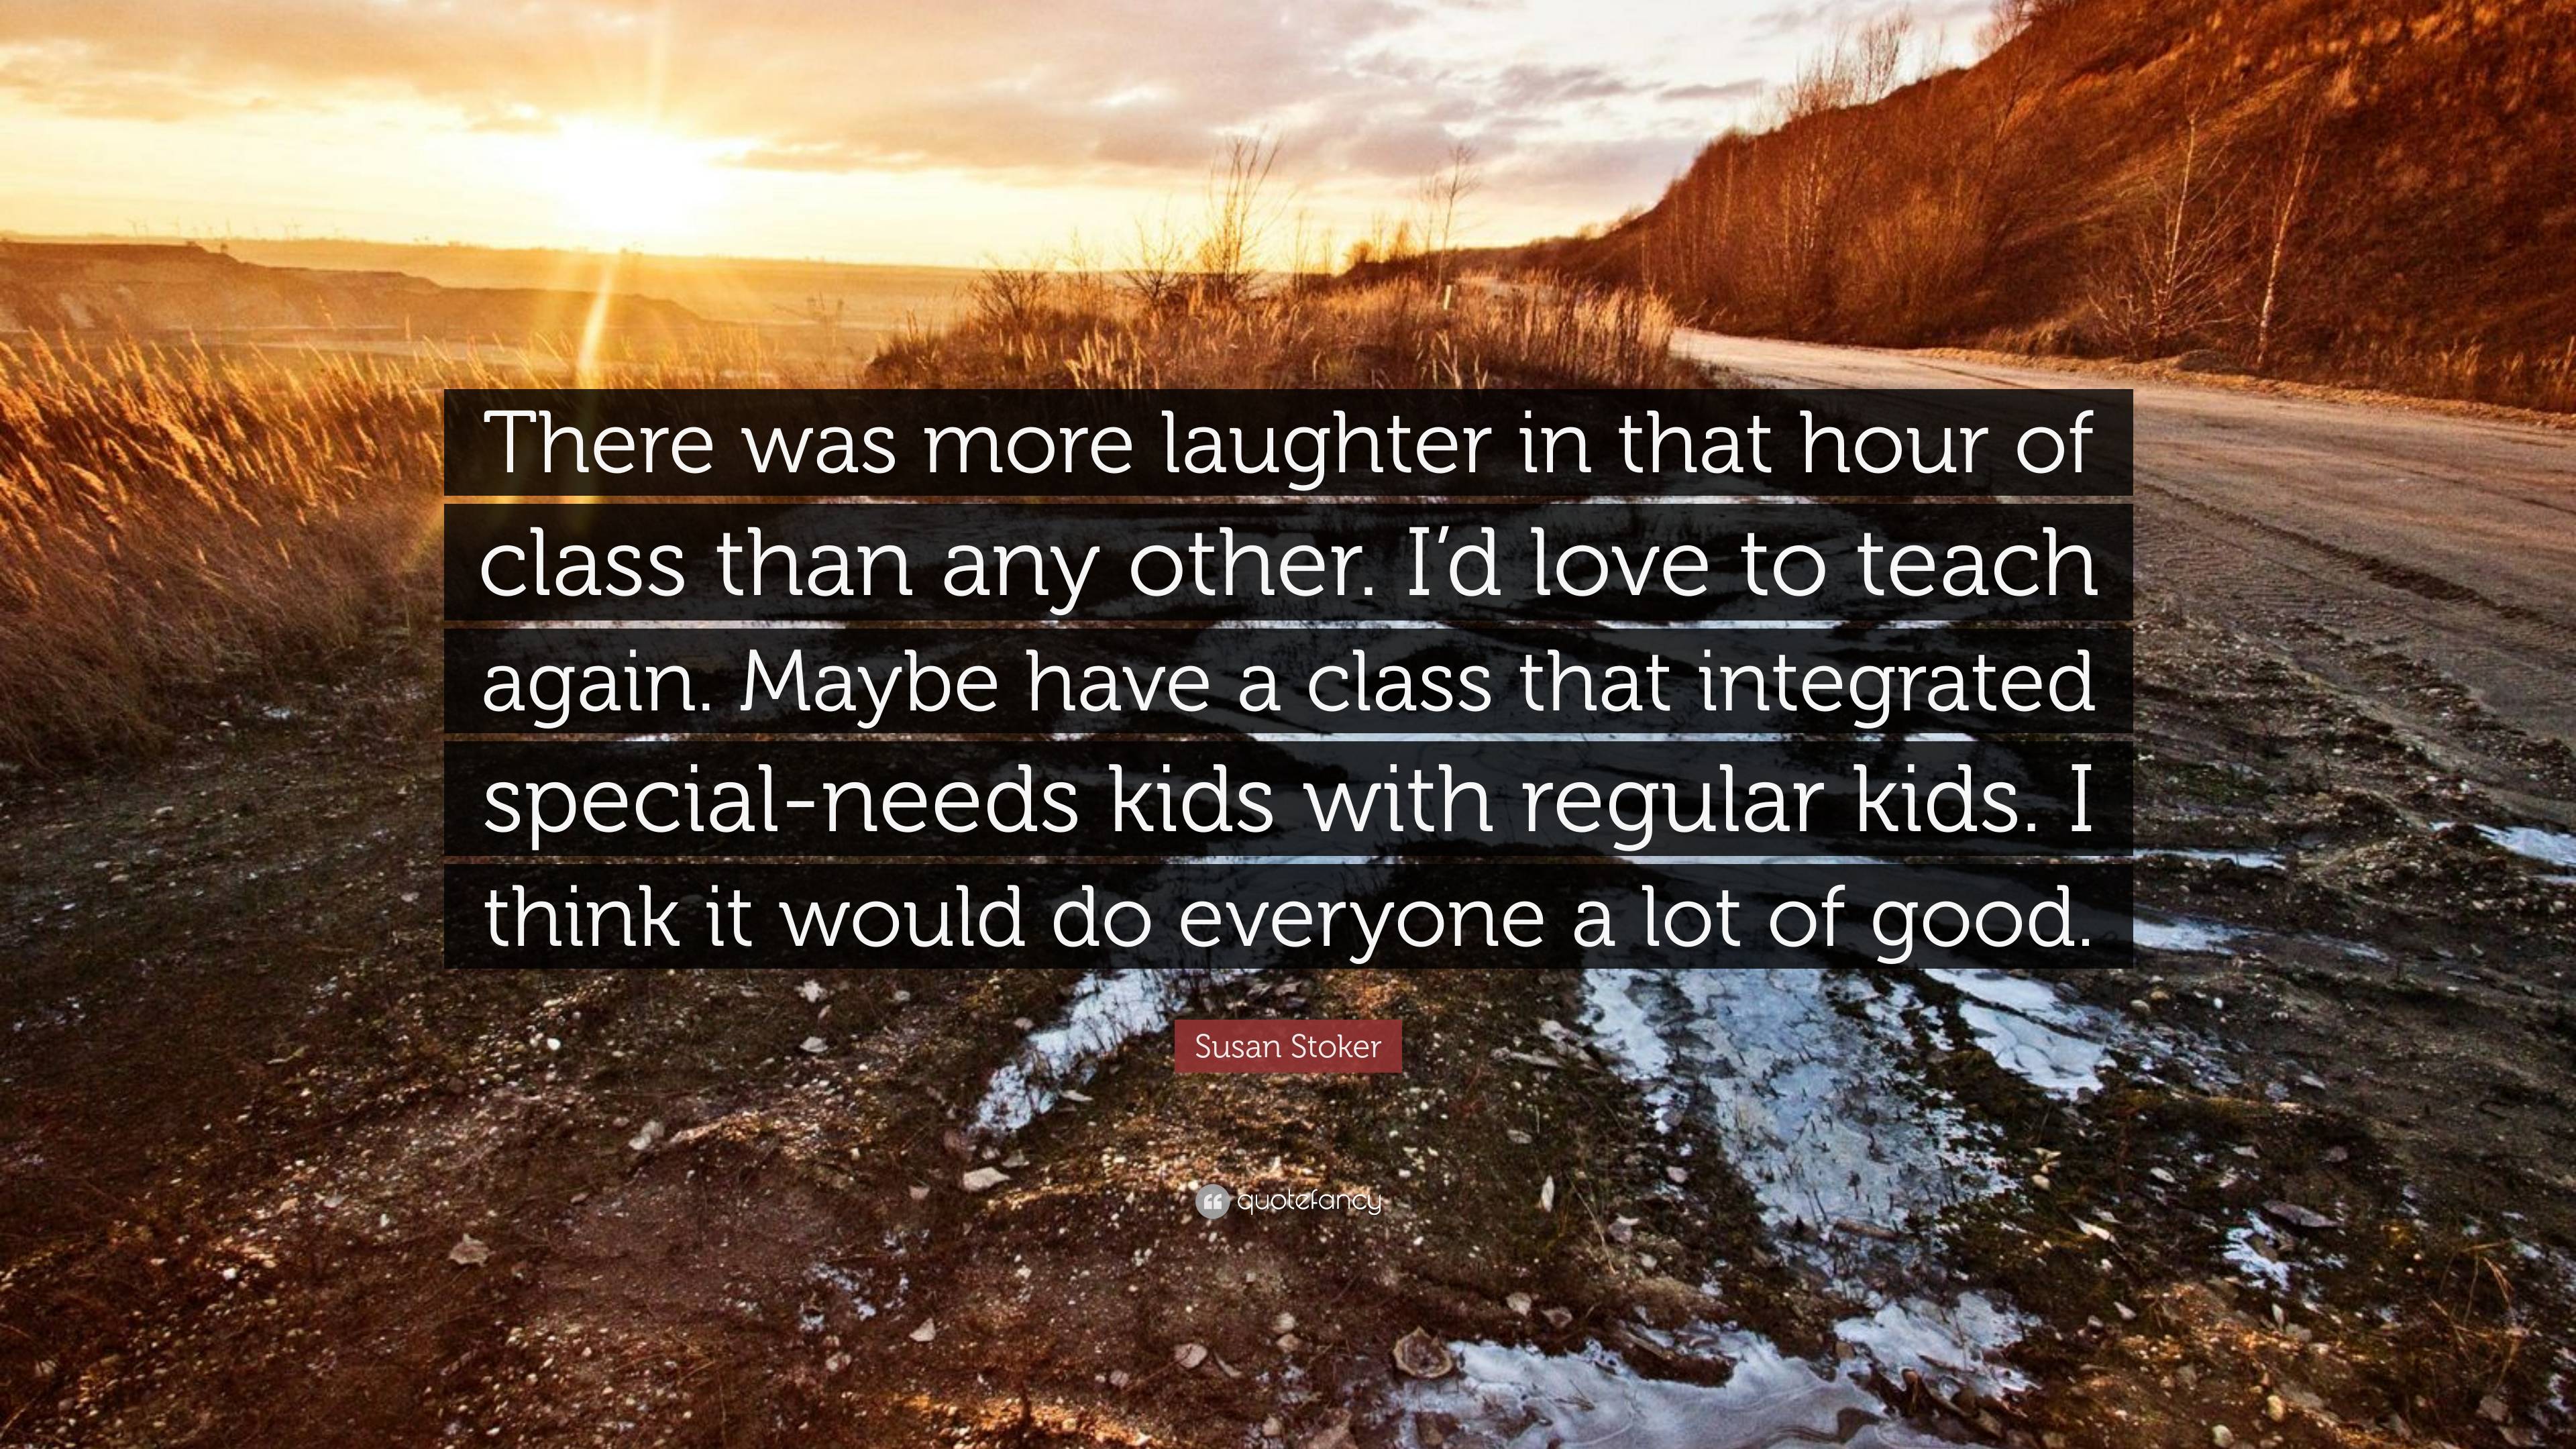 Susan Stoker Quote: “There was more laughter in that hour of class than ...